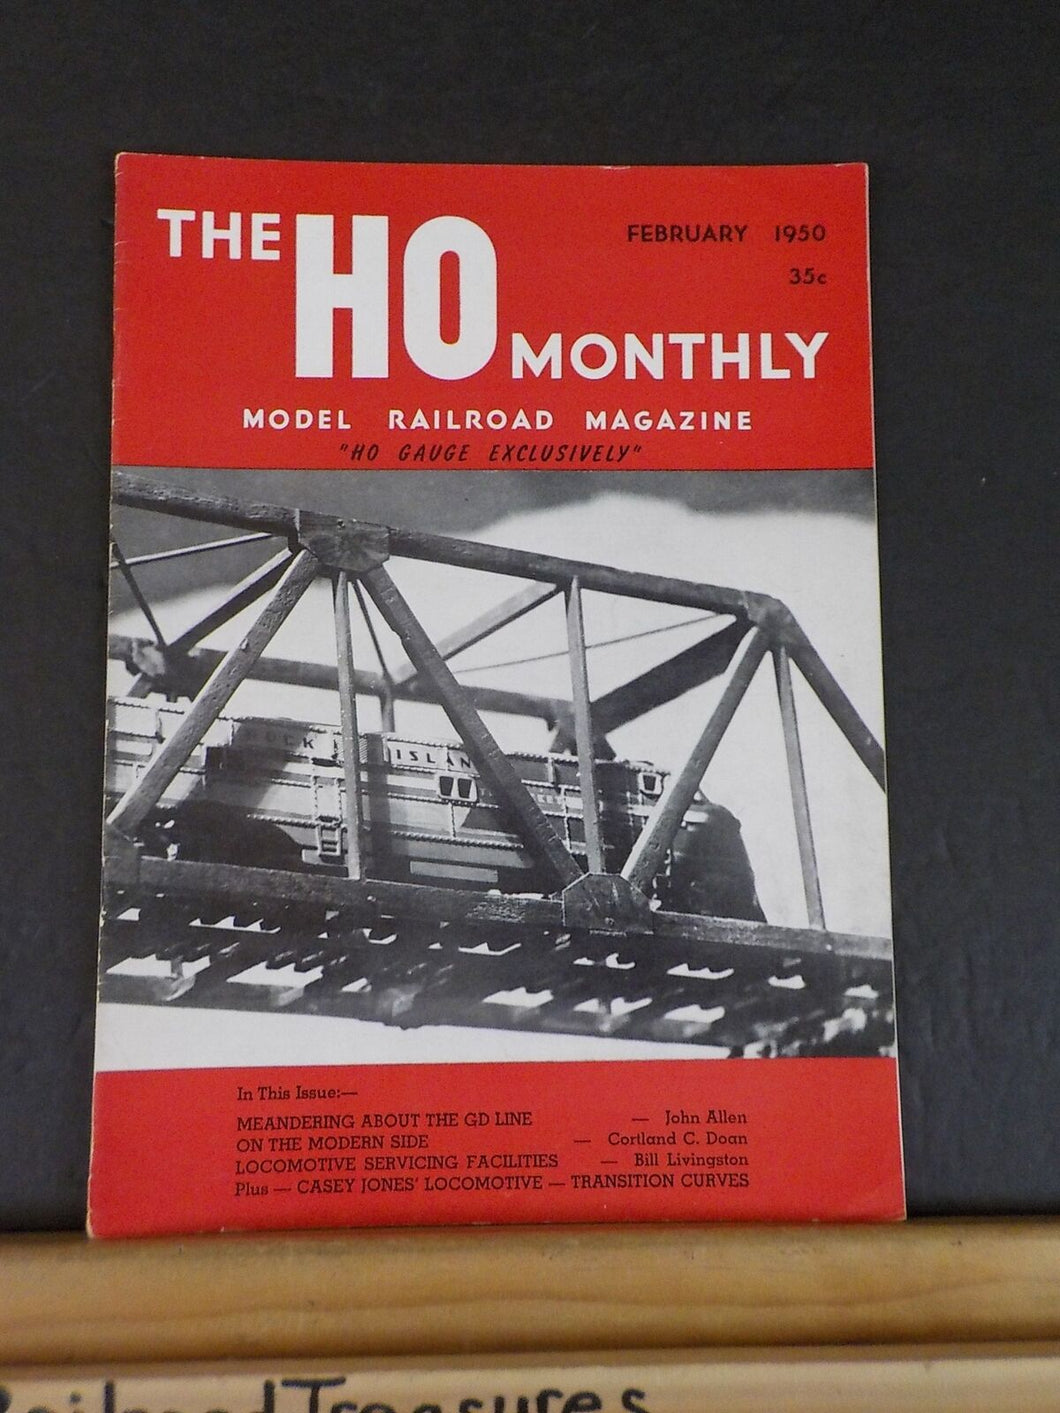 HO Monthly 1950 February Locomotive servicing facilities Transition curves Casey